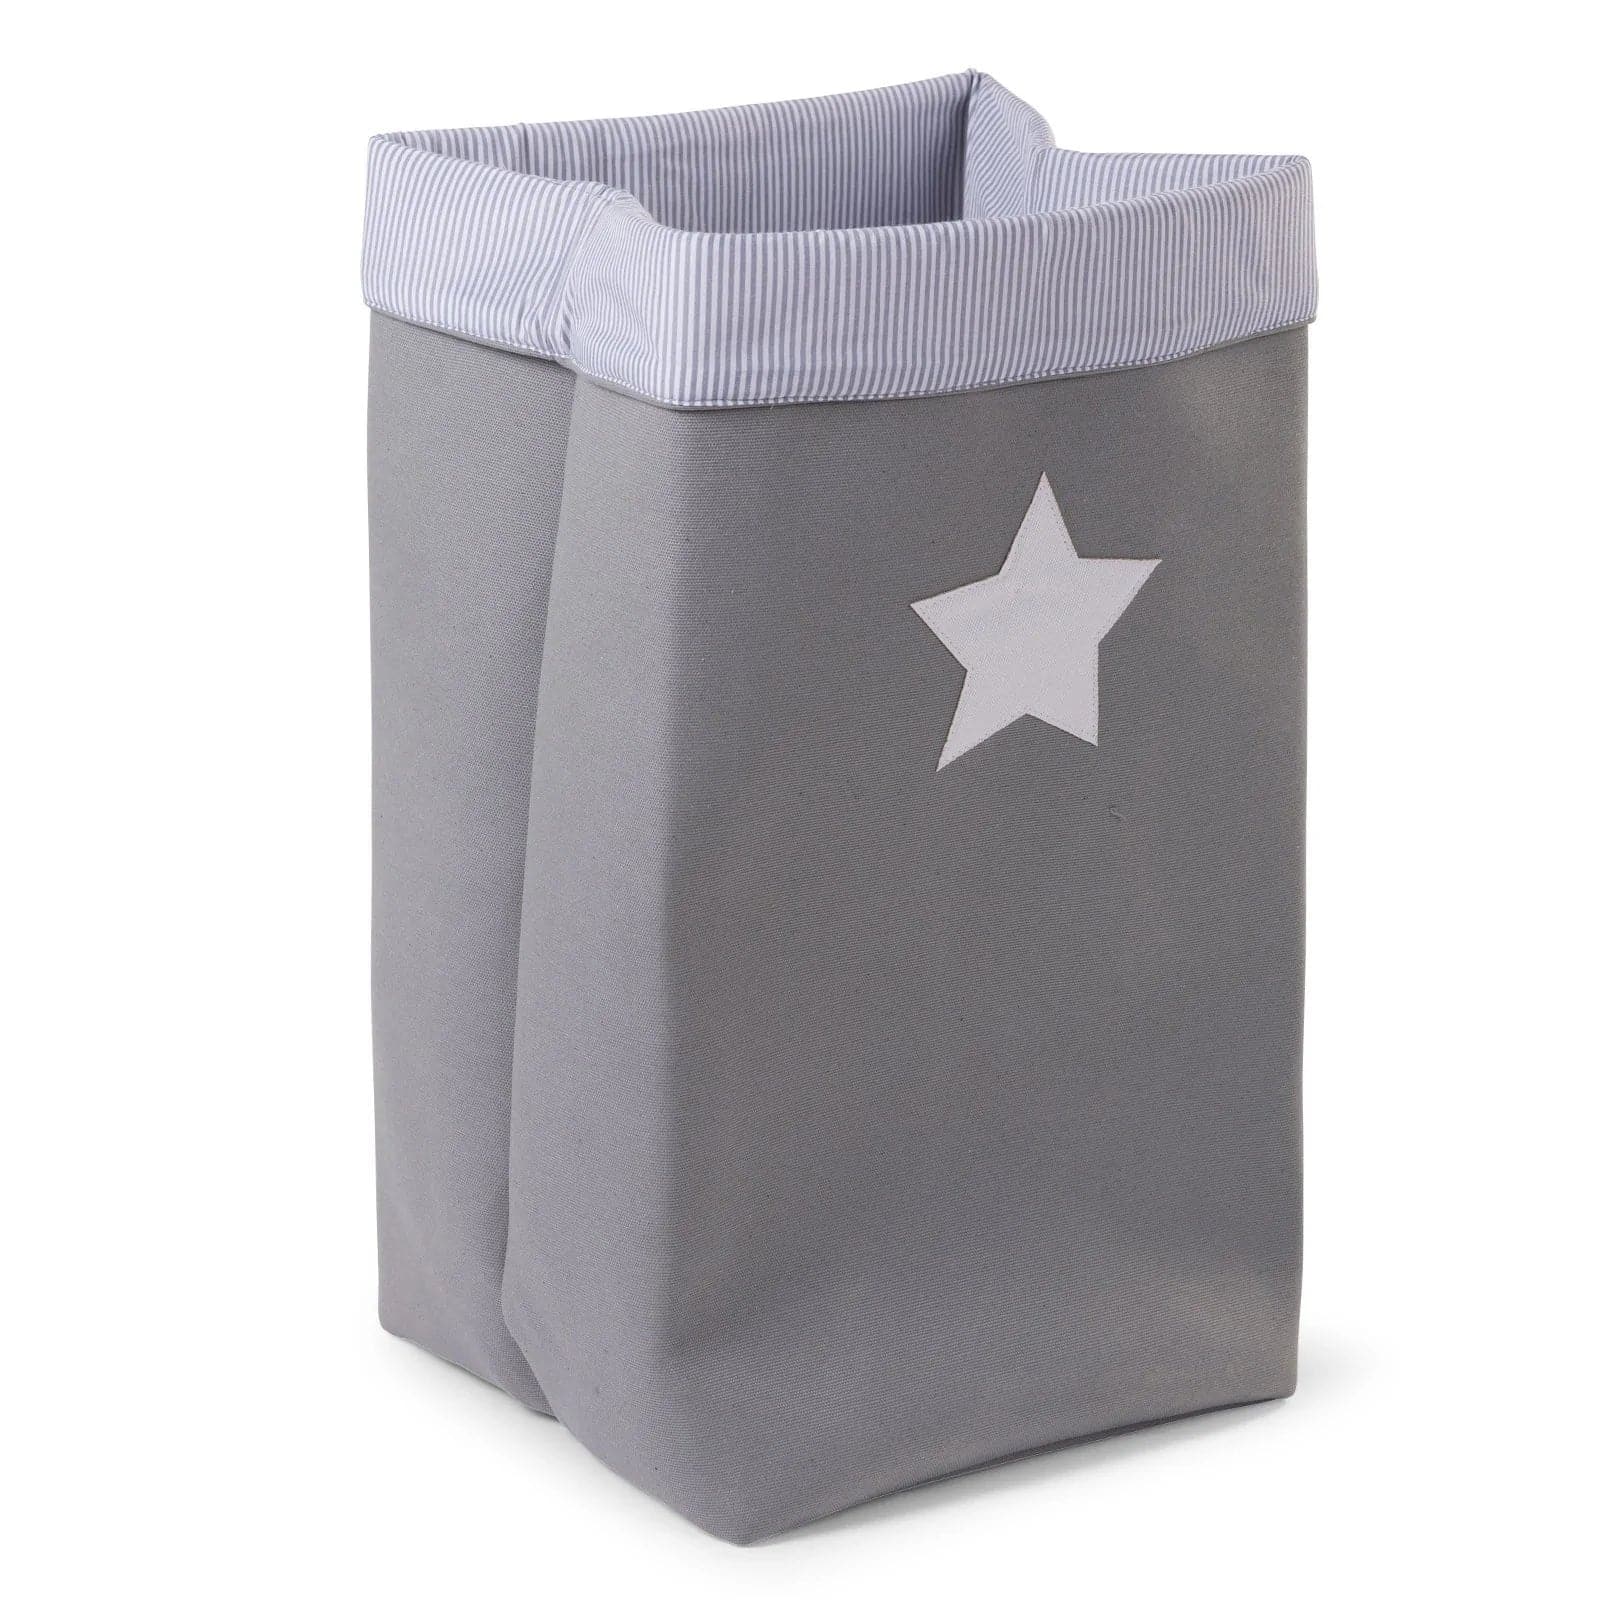 Childhome Canvas Storage Box 32 x 32 x 60 - Grey Stripes -  | For Your Little One